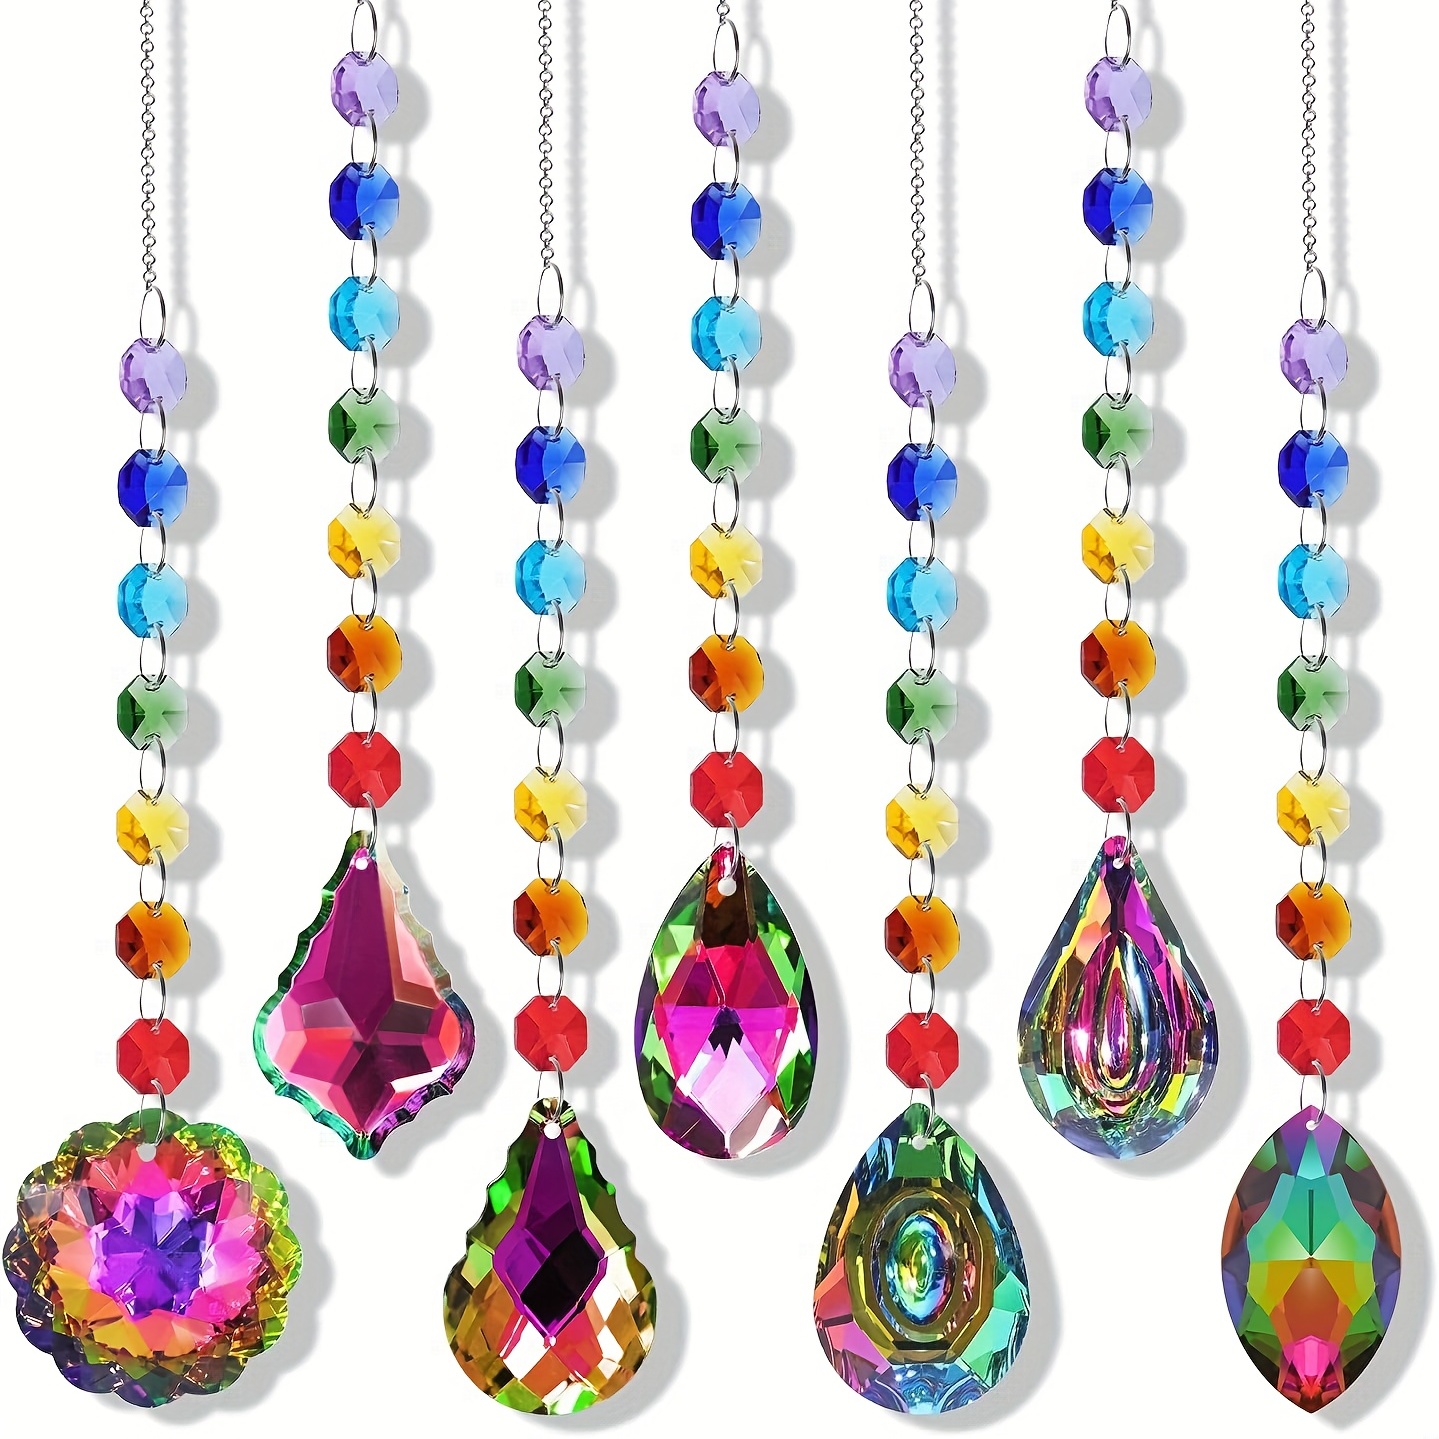 H&D HYALINE & DORA Hanging Crystal Suncatcher Rainbow Maker with Heart  Prism Pendant and Crystal Prism Ball and Chakra Colored Beads,for Window  Decor,Pack of 2